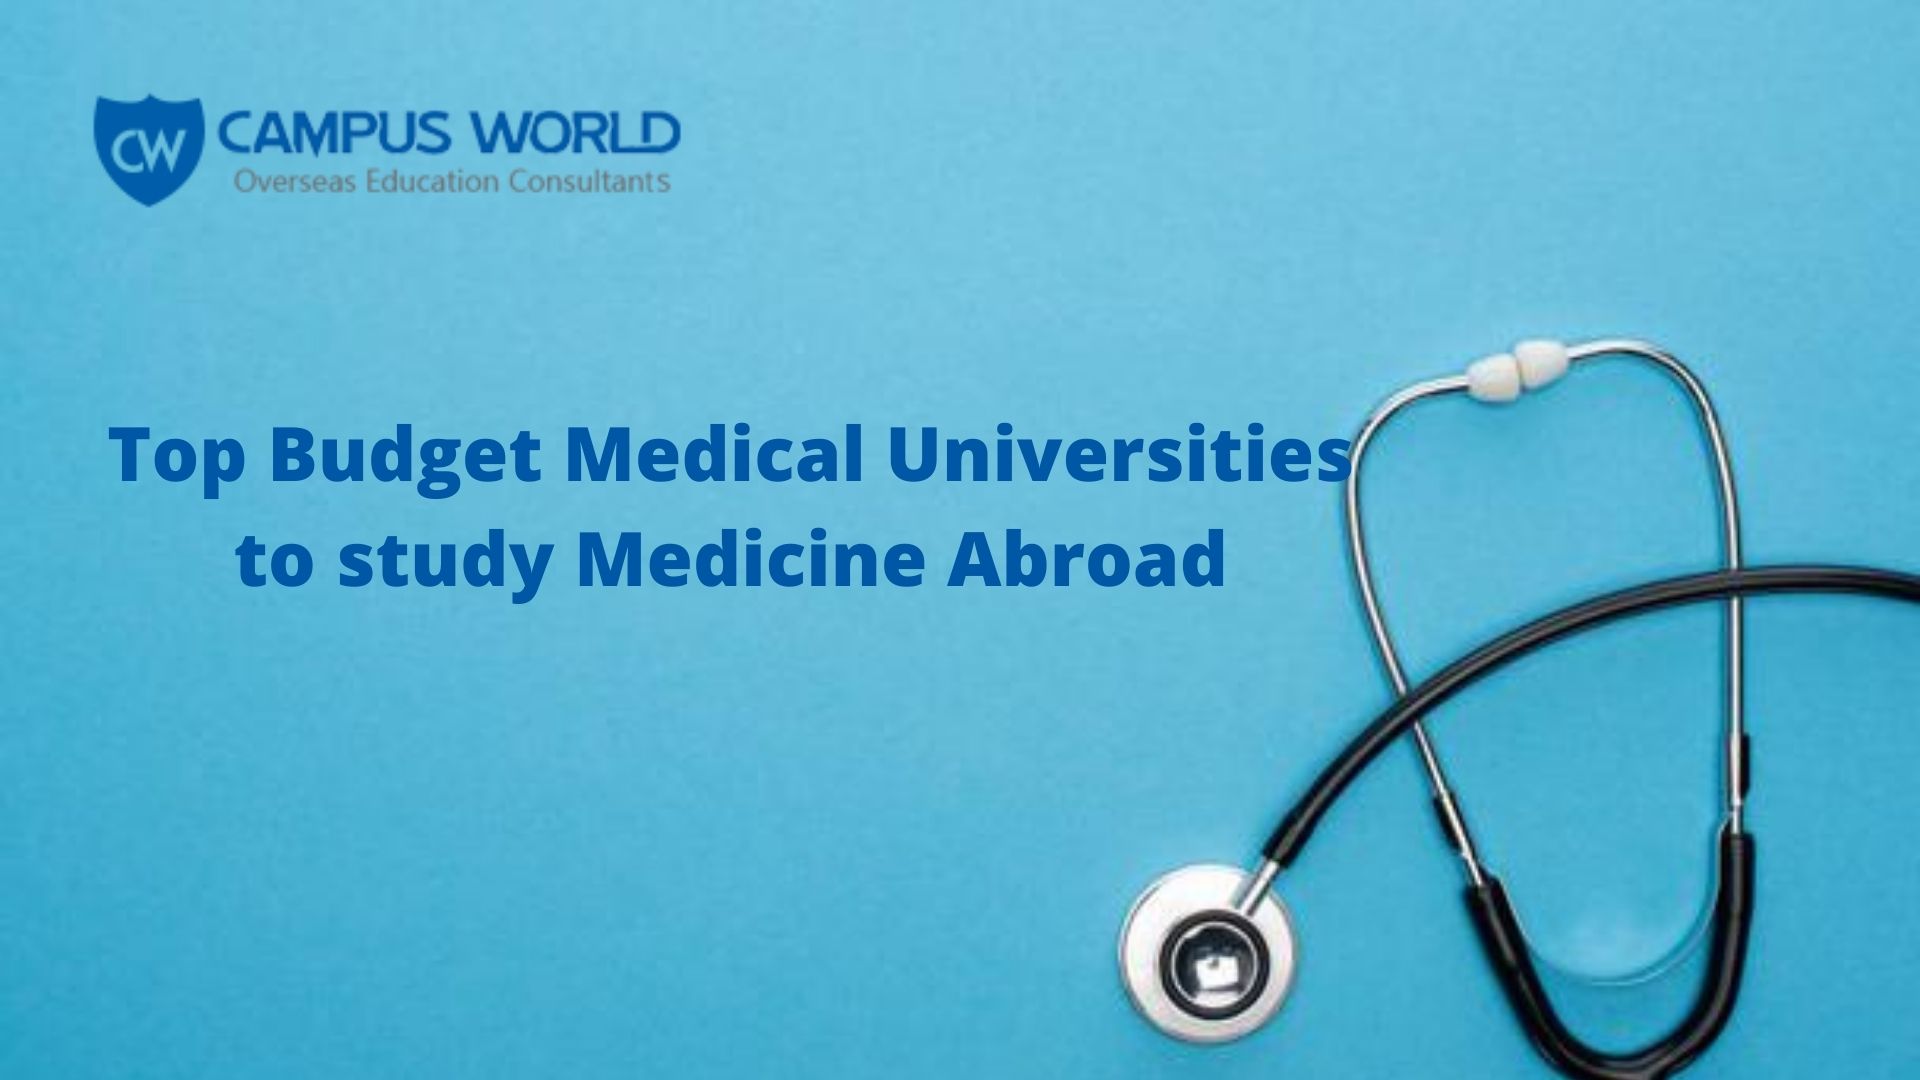 Top Budget Medical Universities to study Medicine Abroad